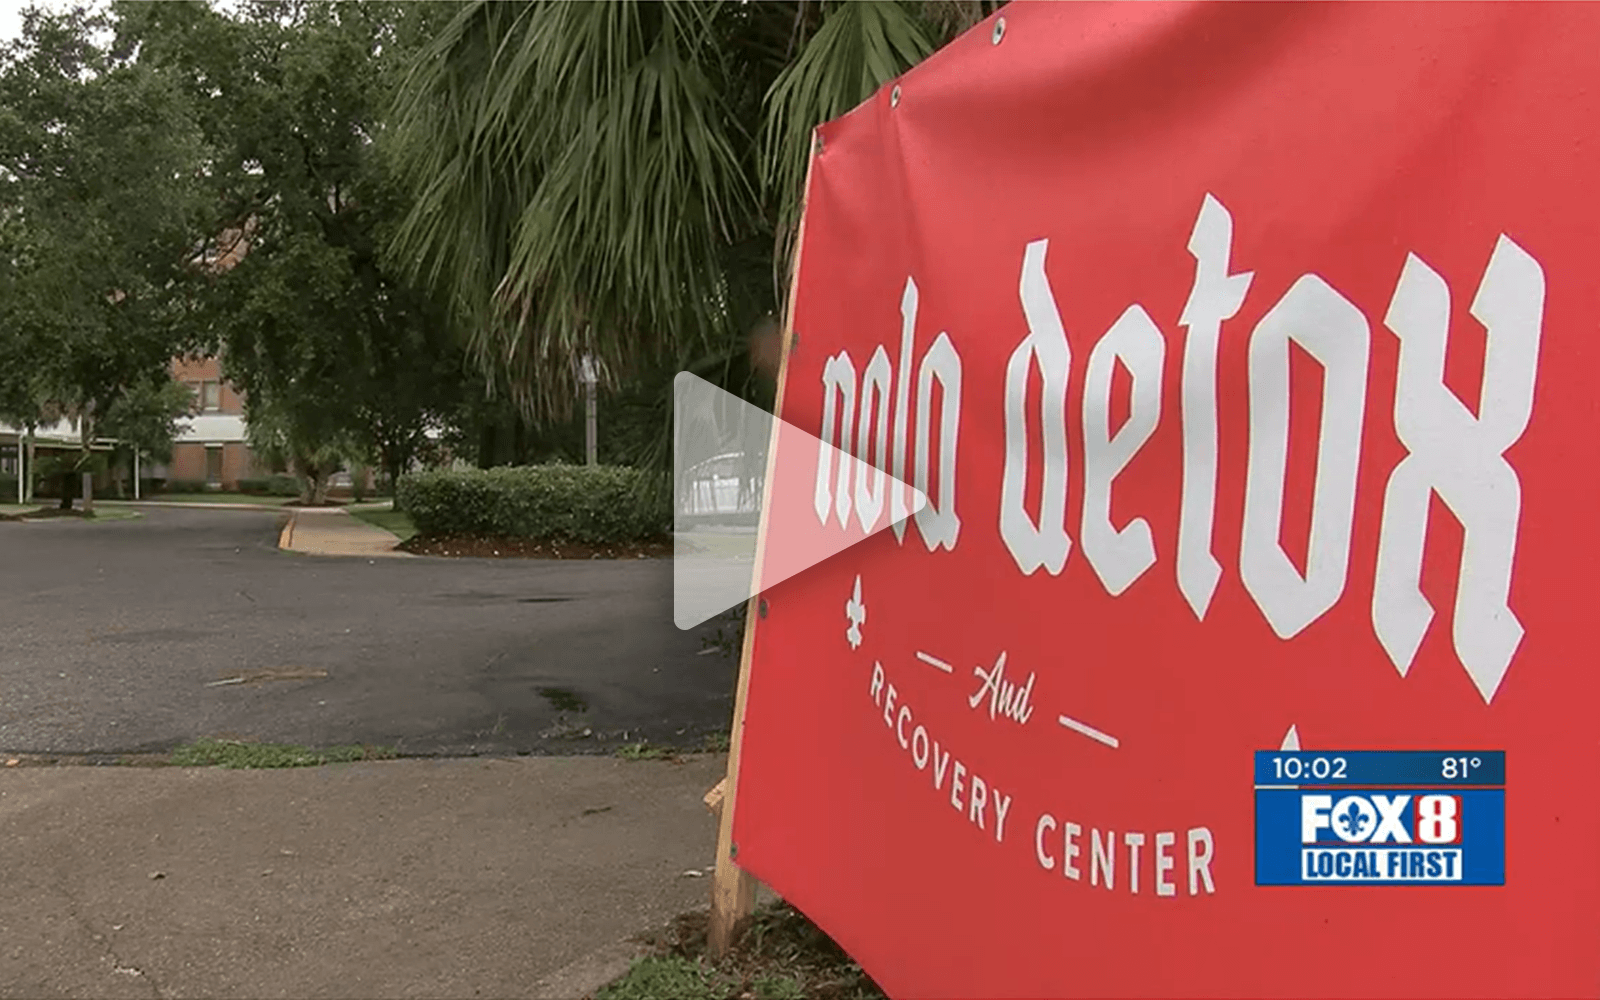 As fentanyl and overdose deaths skyrocket, founders launch new recovery/addiction treatment center - NOLA Detox and Recovery Center